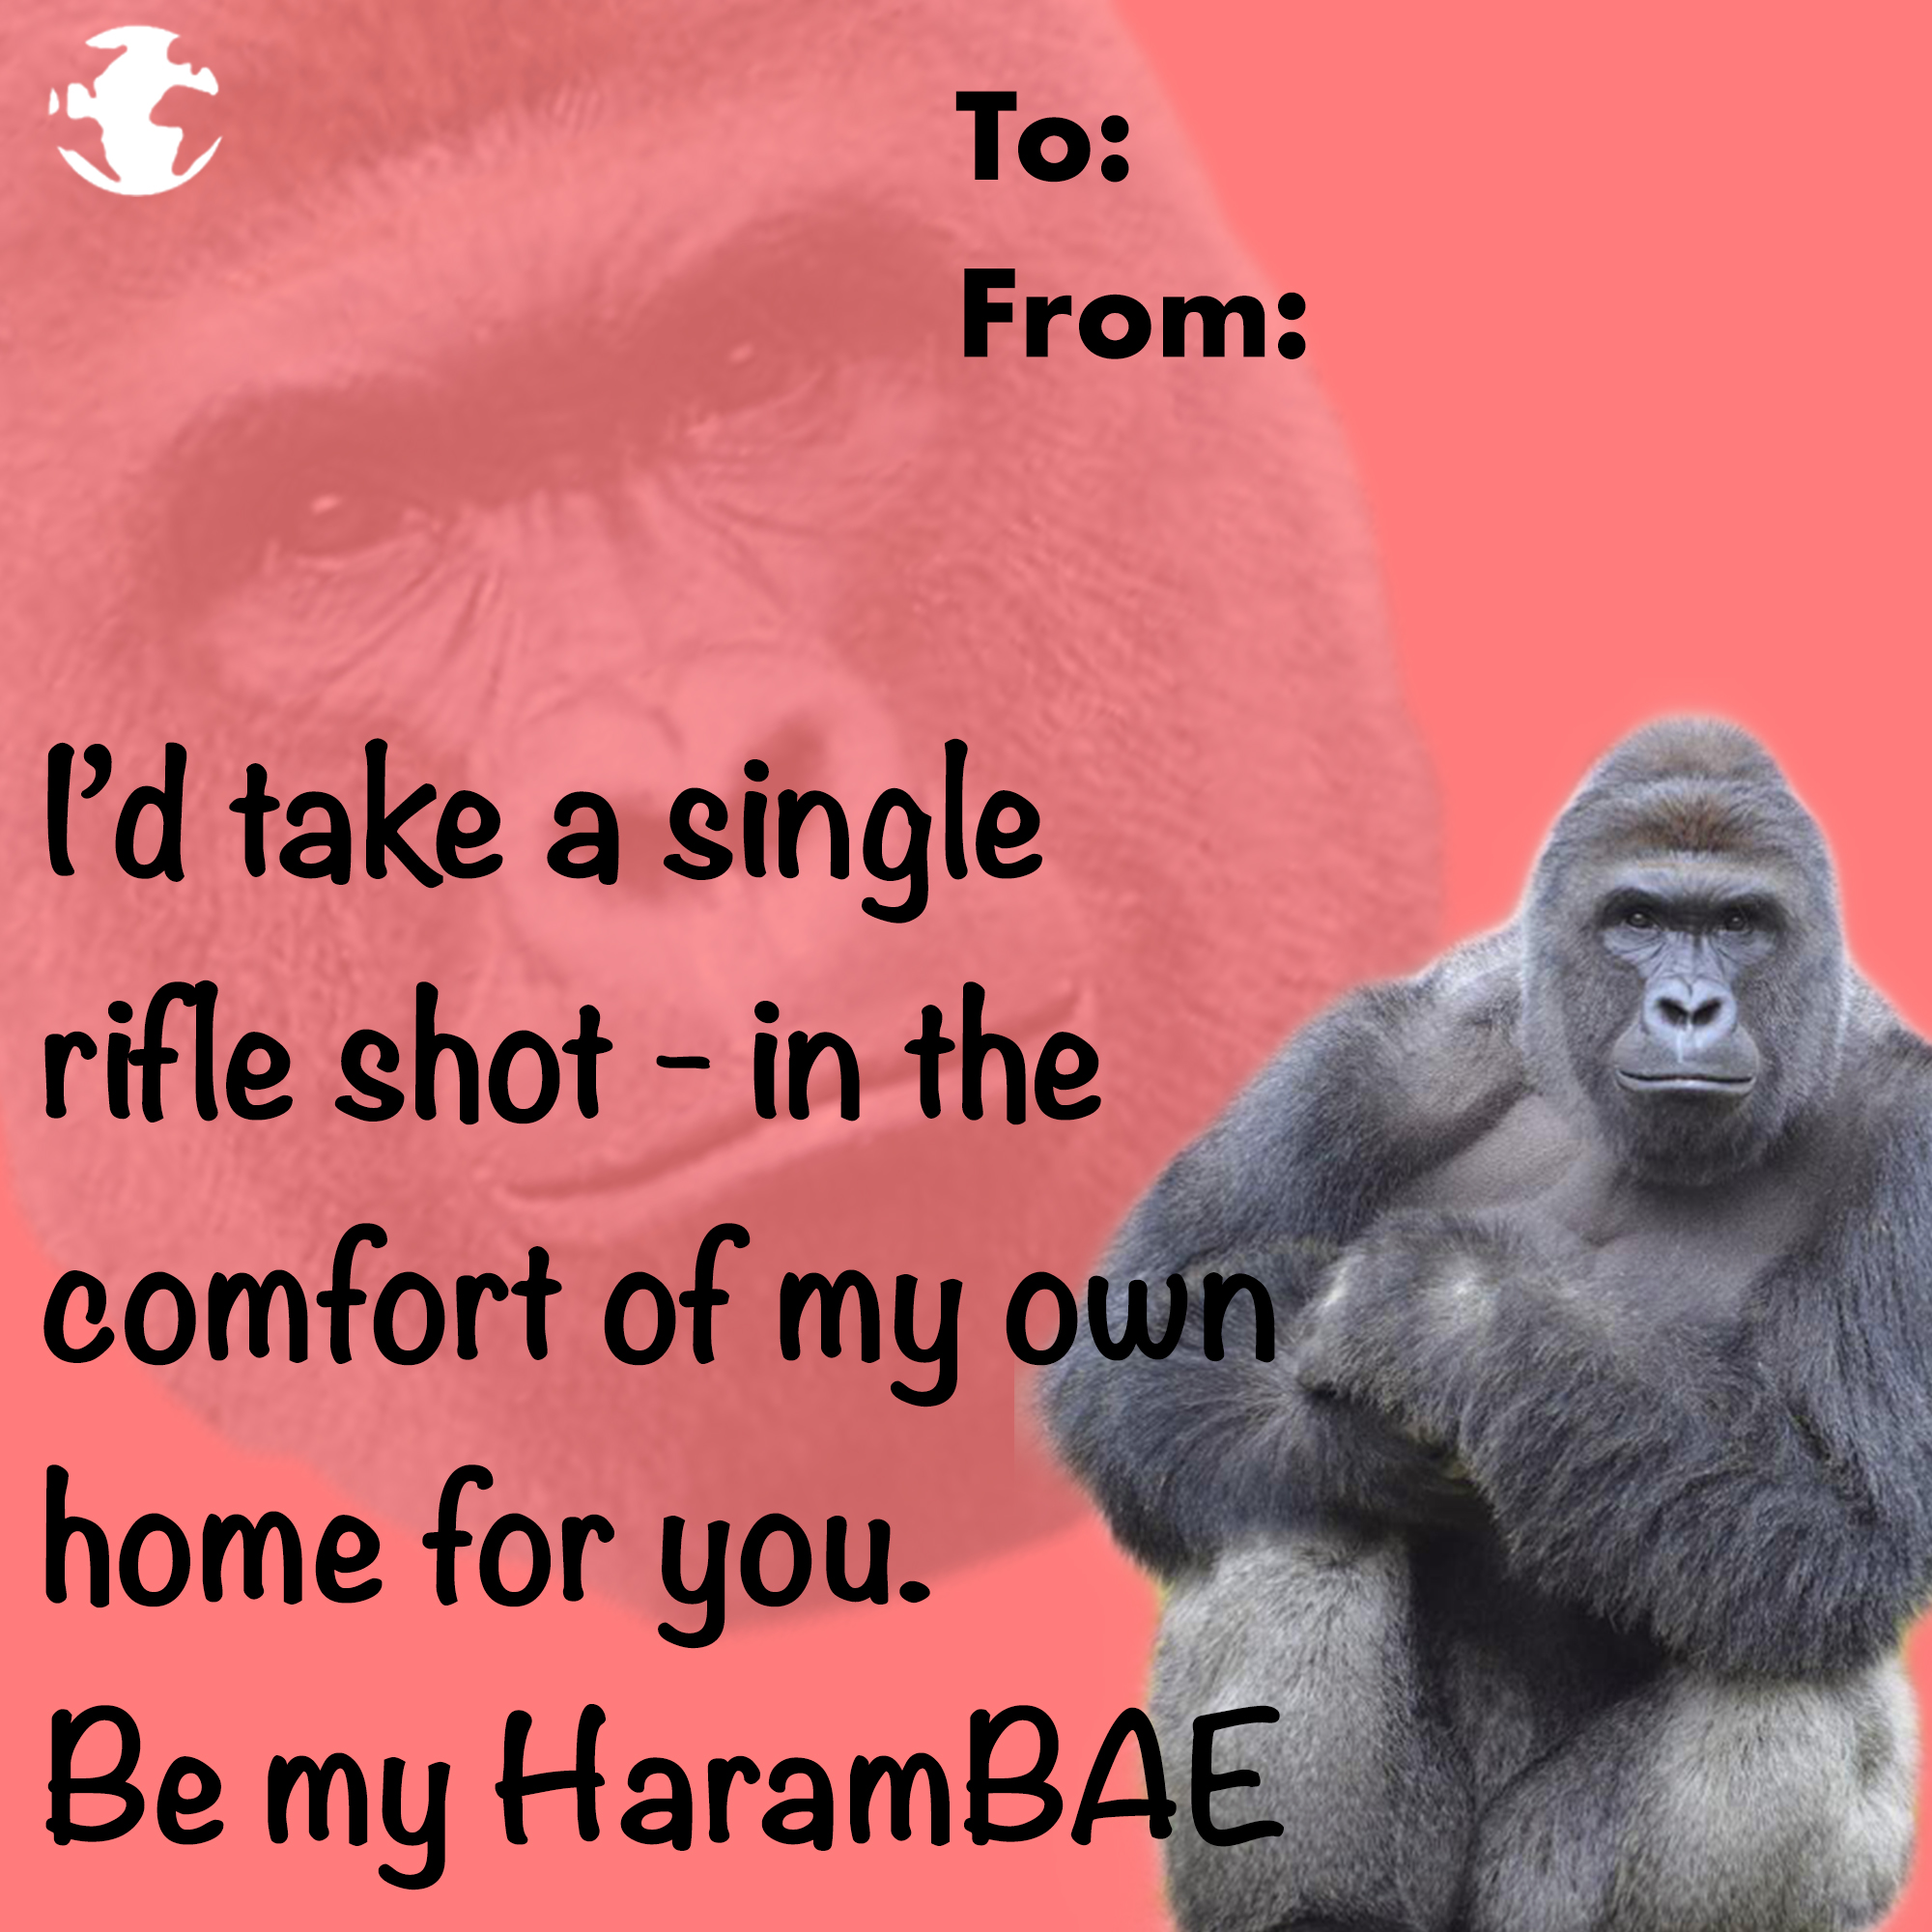 eBaum's Valentine's Day Cards 2022 - il melograno - To From a l'd take a single rifle shot in the comfort of my own home for you. Be my HaramBAE